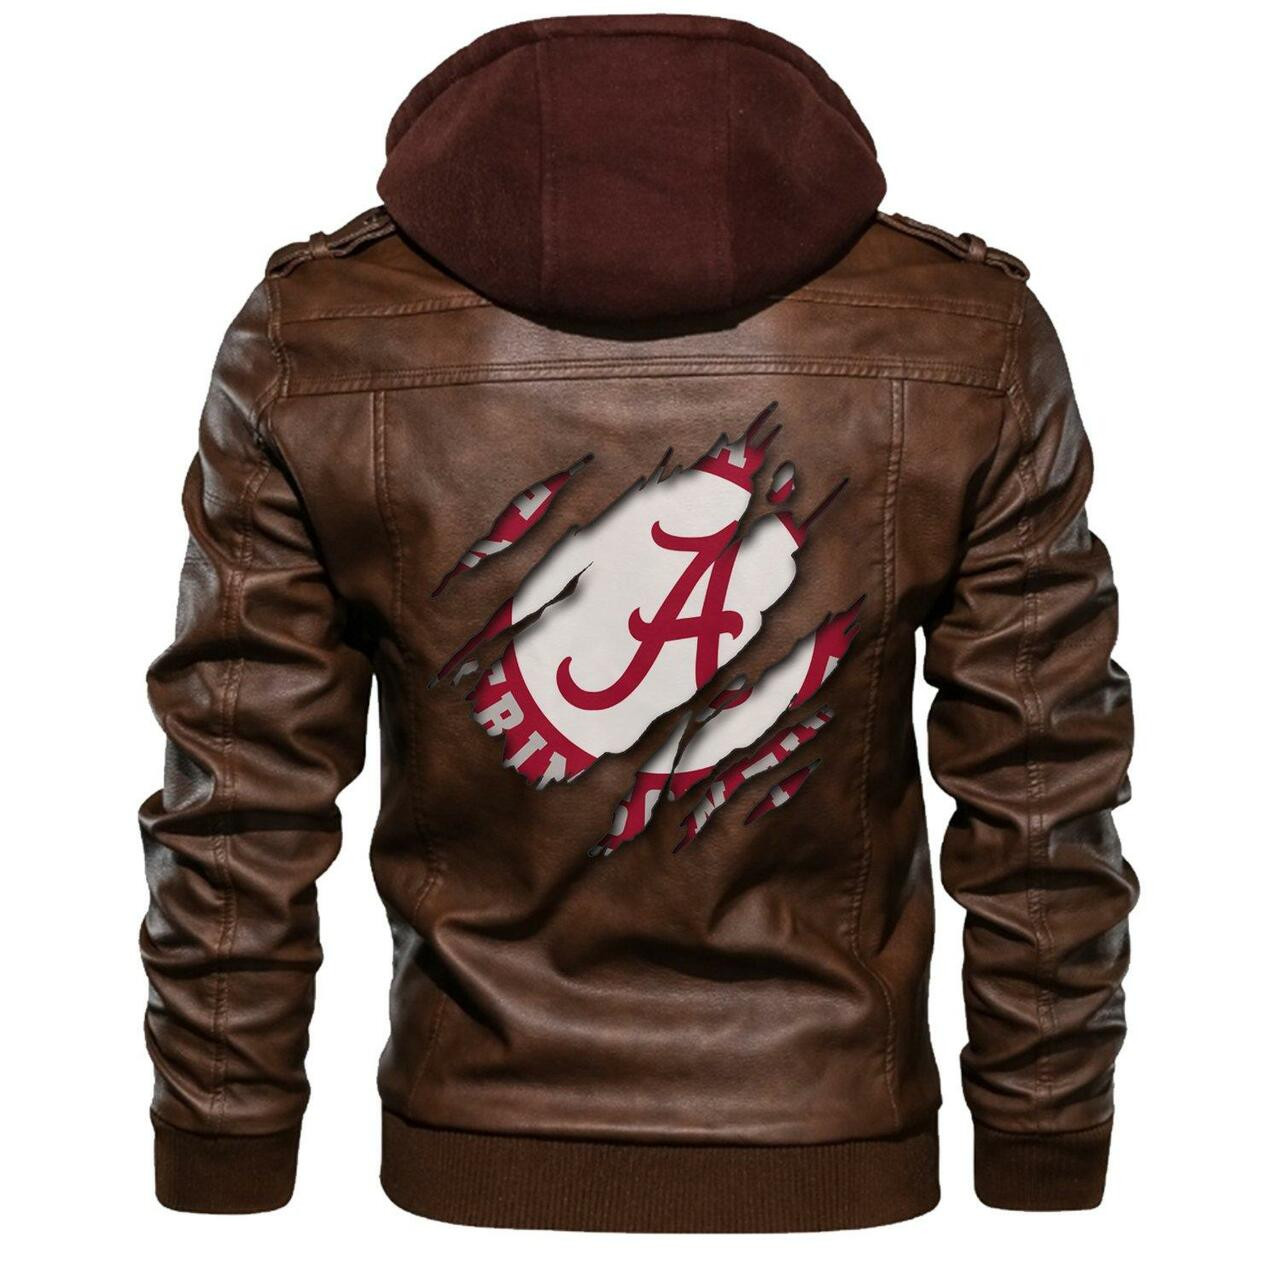 Check out and find the right leather jacket below 245